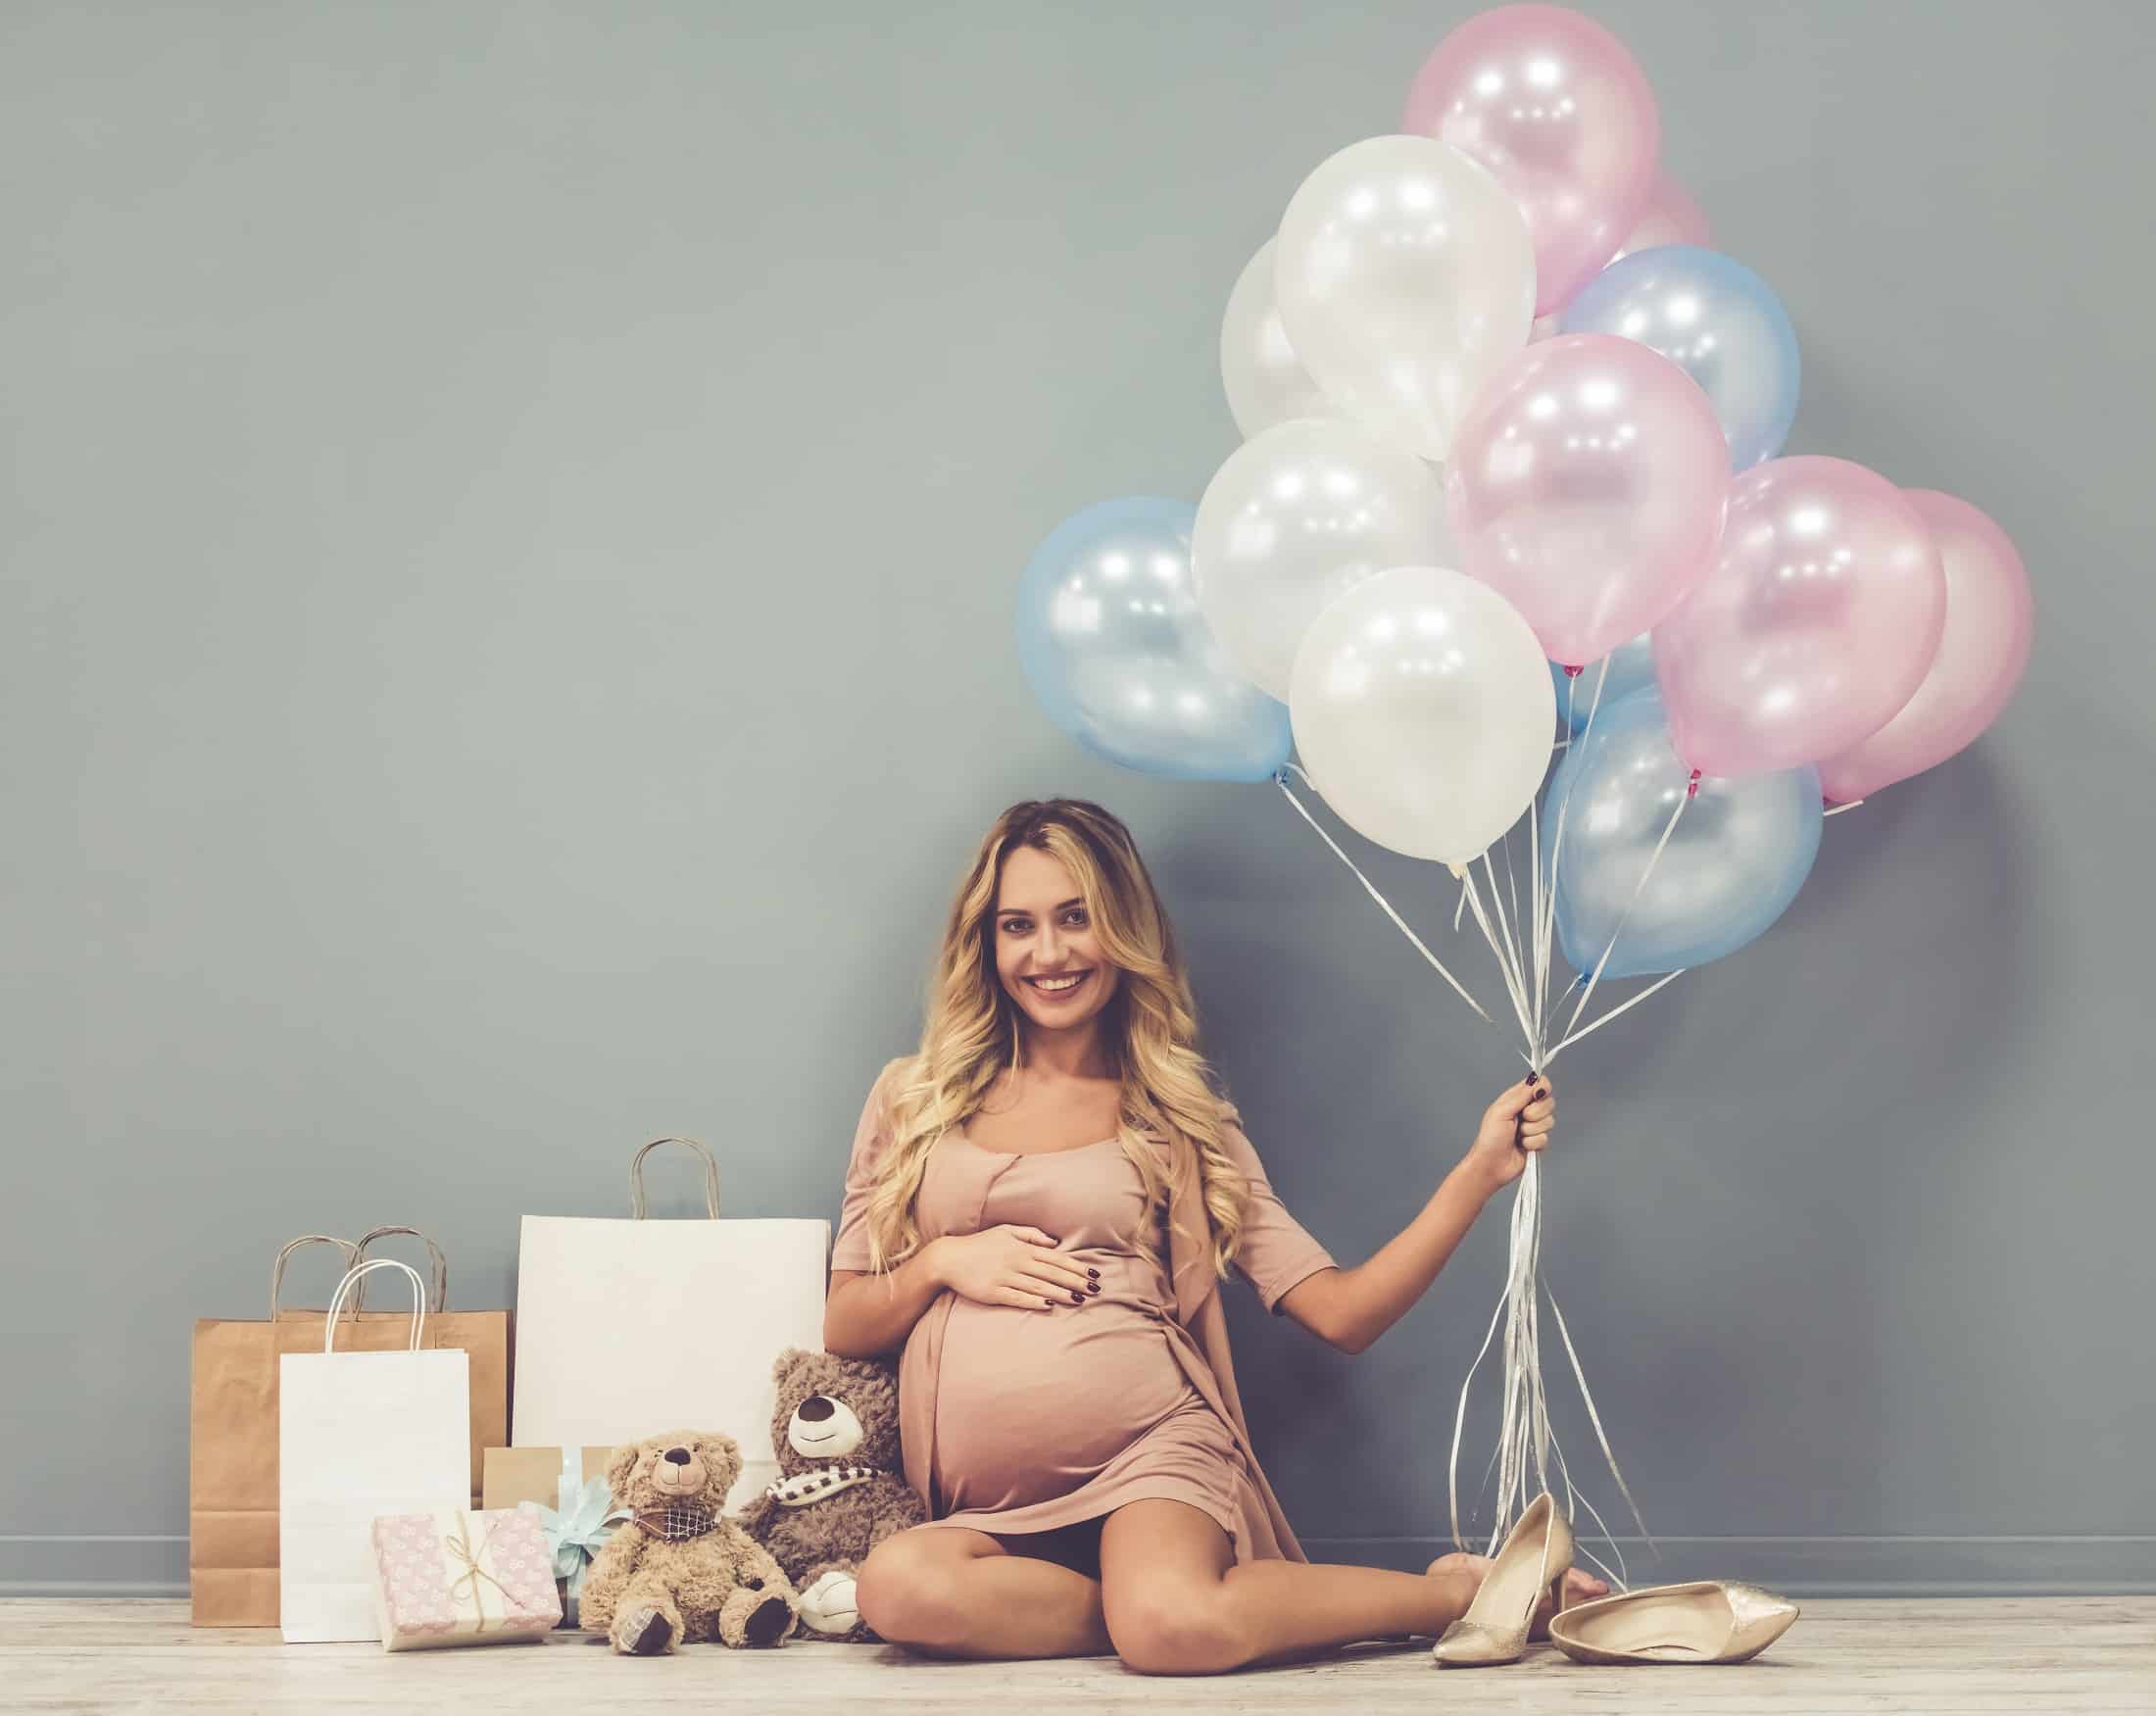 What to give the mom-to-be for the baby shower? Here are 3 practical gifts that are sure to come in handy